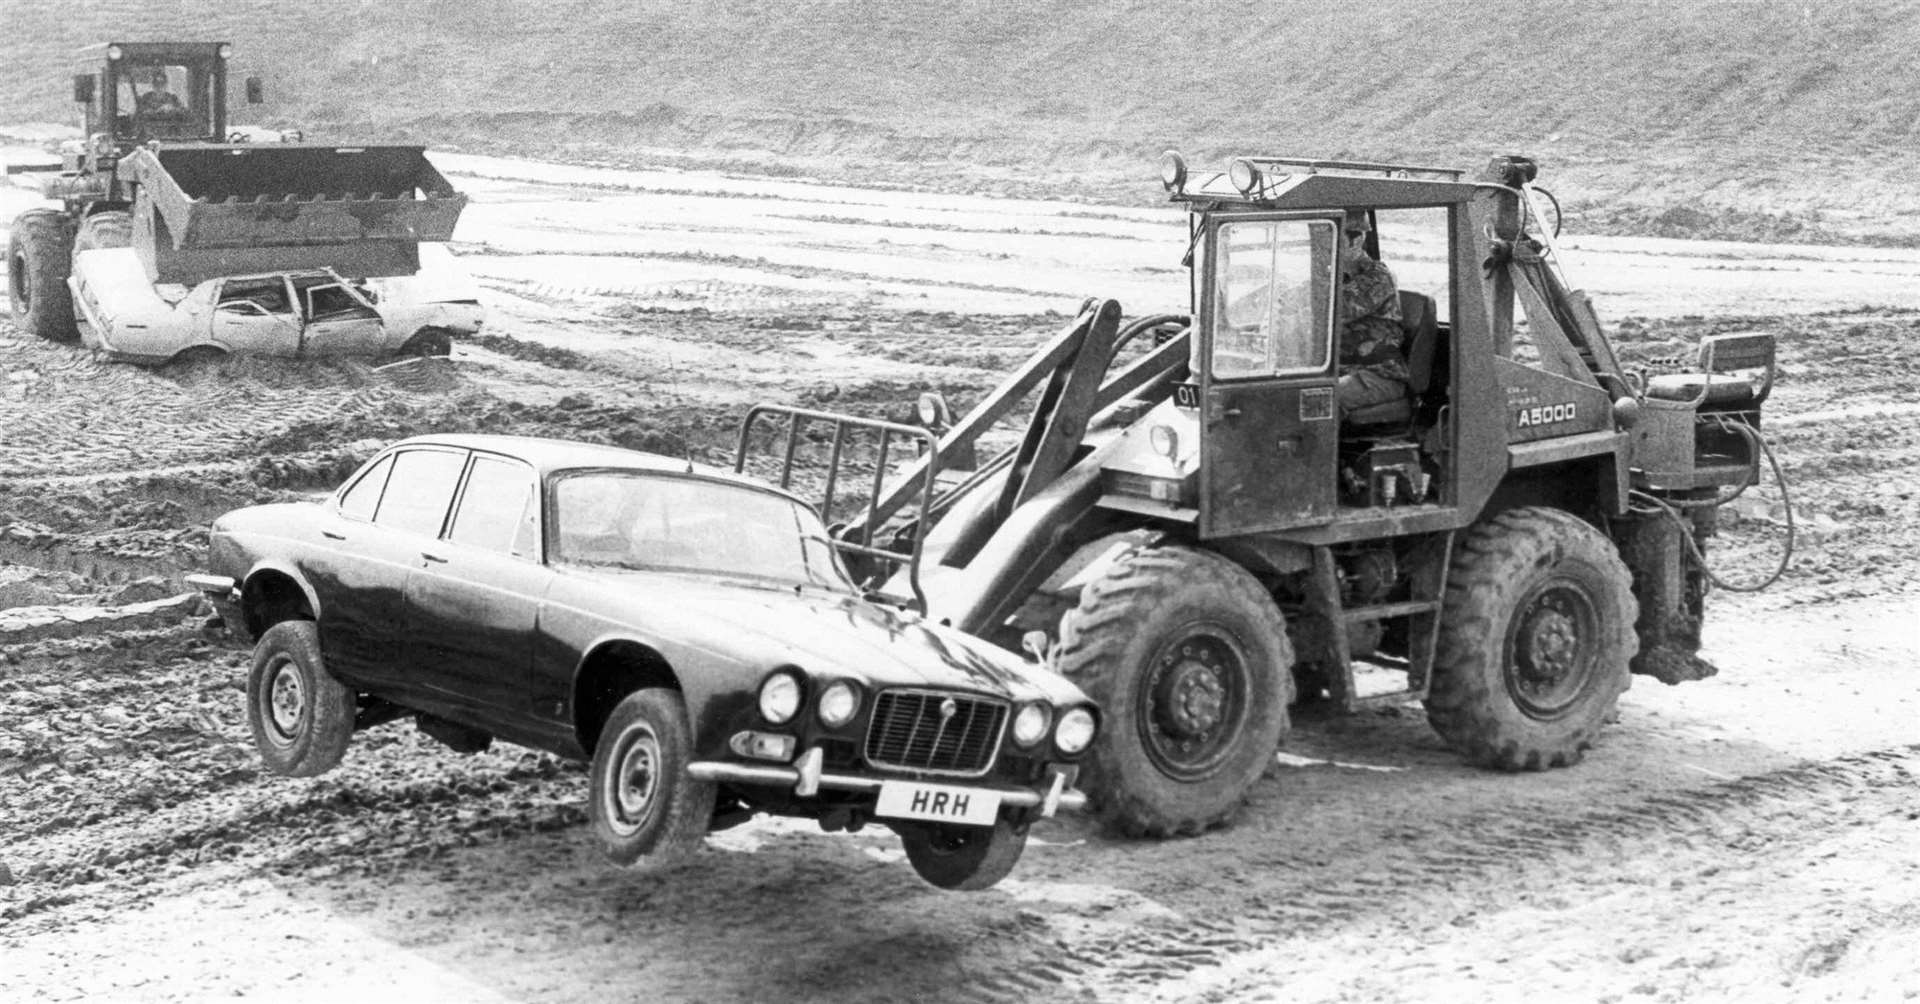 The Royal Engineers had plenty of surprises in store for Prince Charles when he visited them at Chattenden Barracks, Gillingham in March 1985. They let him get behind the wheel of this giant army vehicle and invited him to crush a jaguar that looked exactly like his own car. In fact it was a wreck from a scrapheap that the Sapper had spruced up